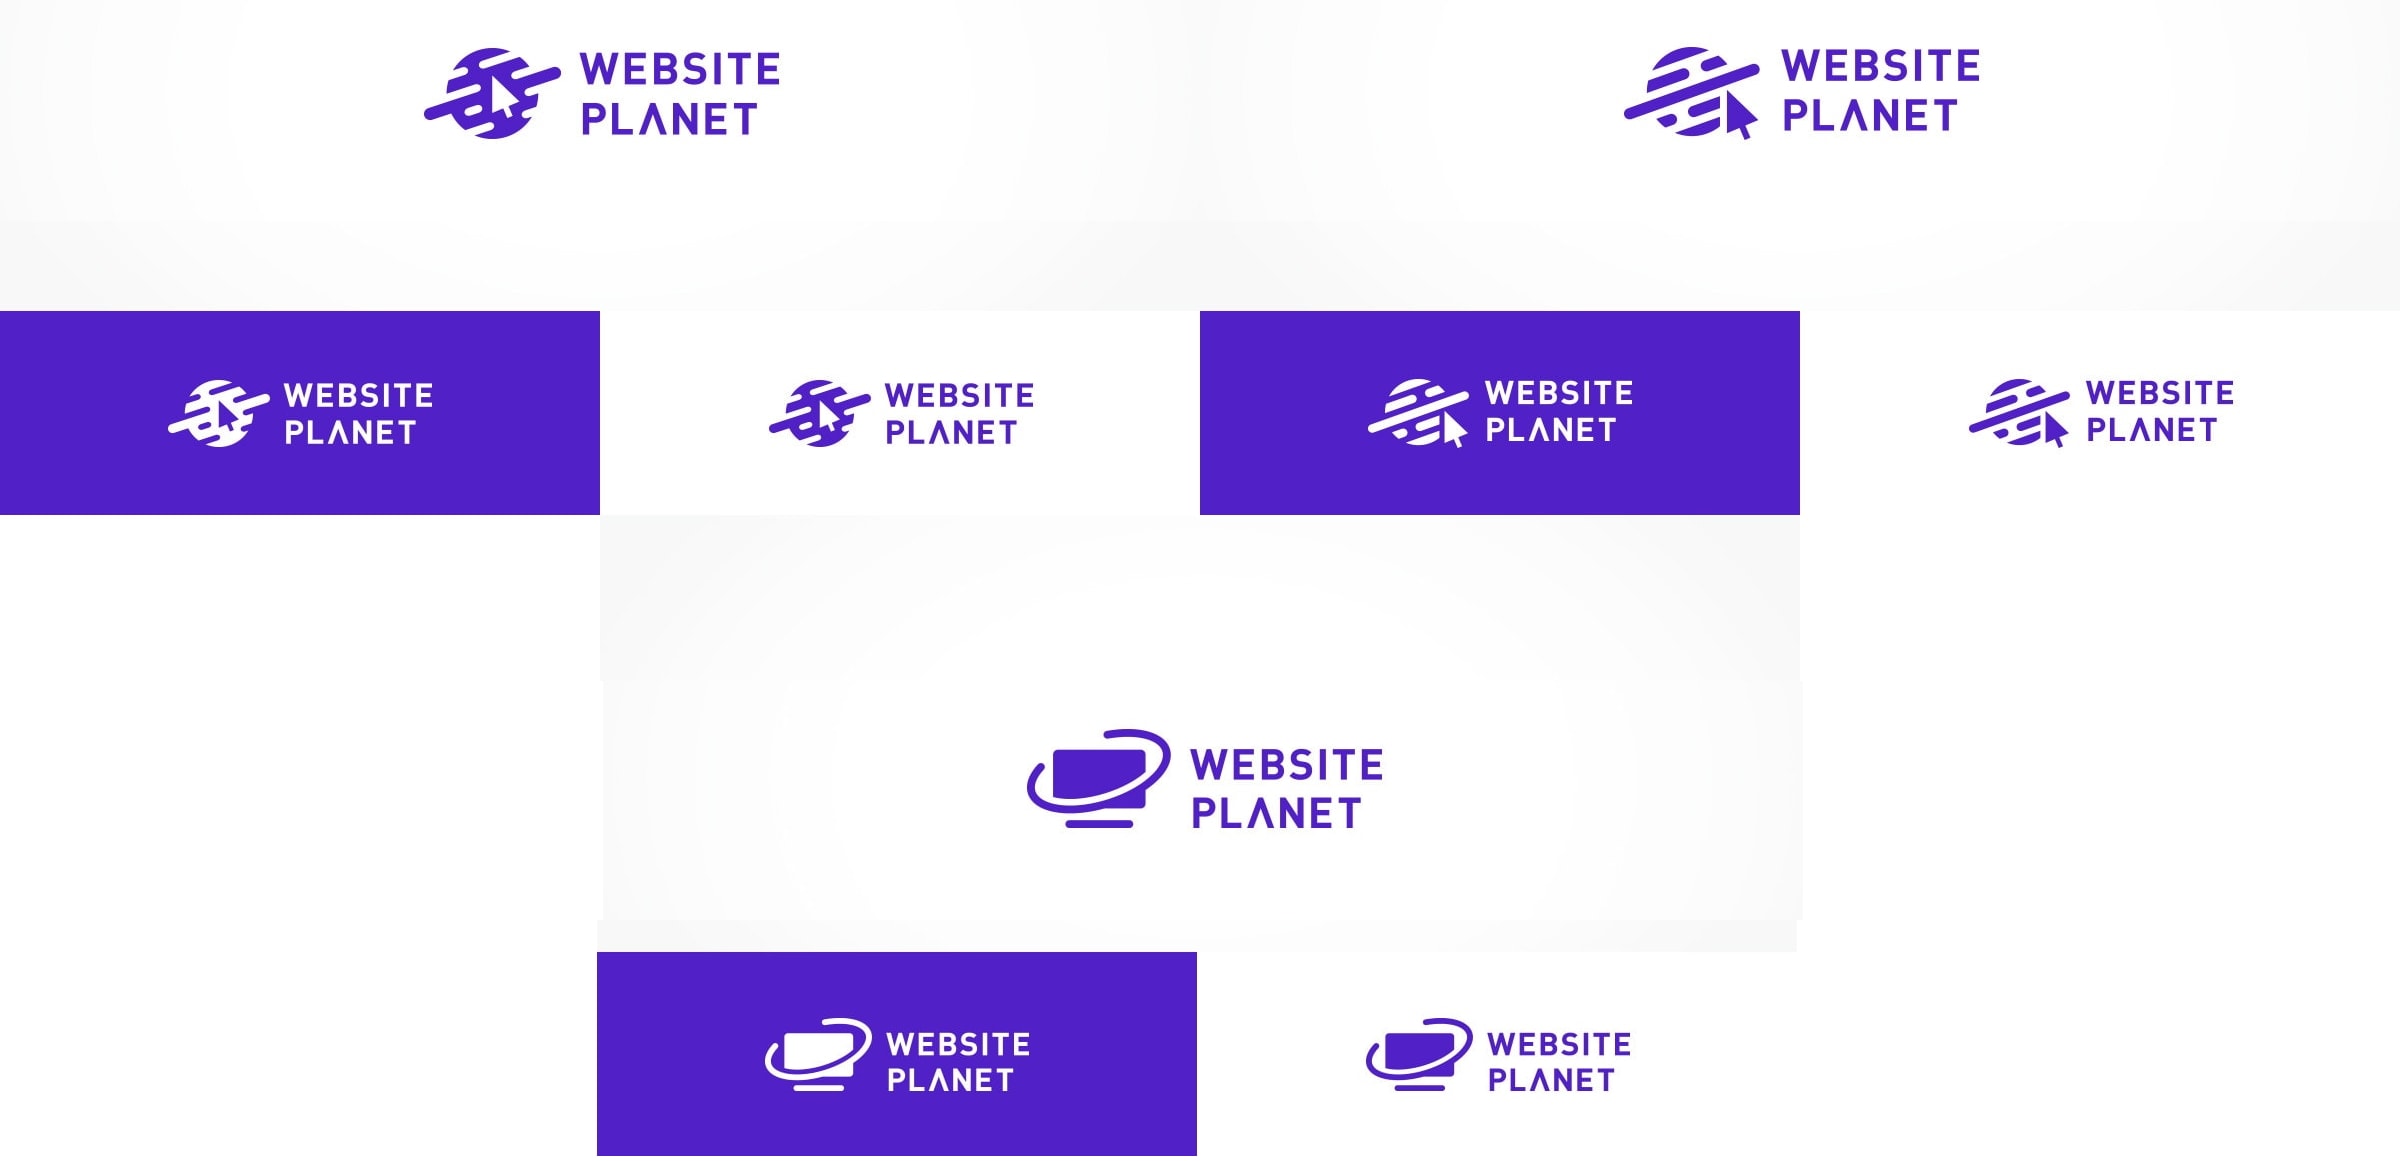 Website Planet logos from DesignCrowd